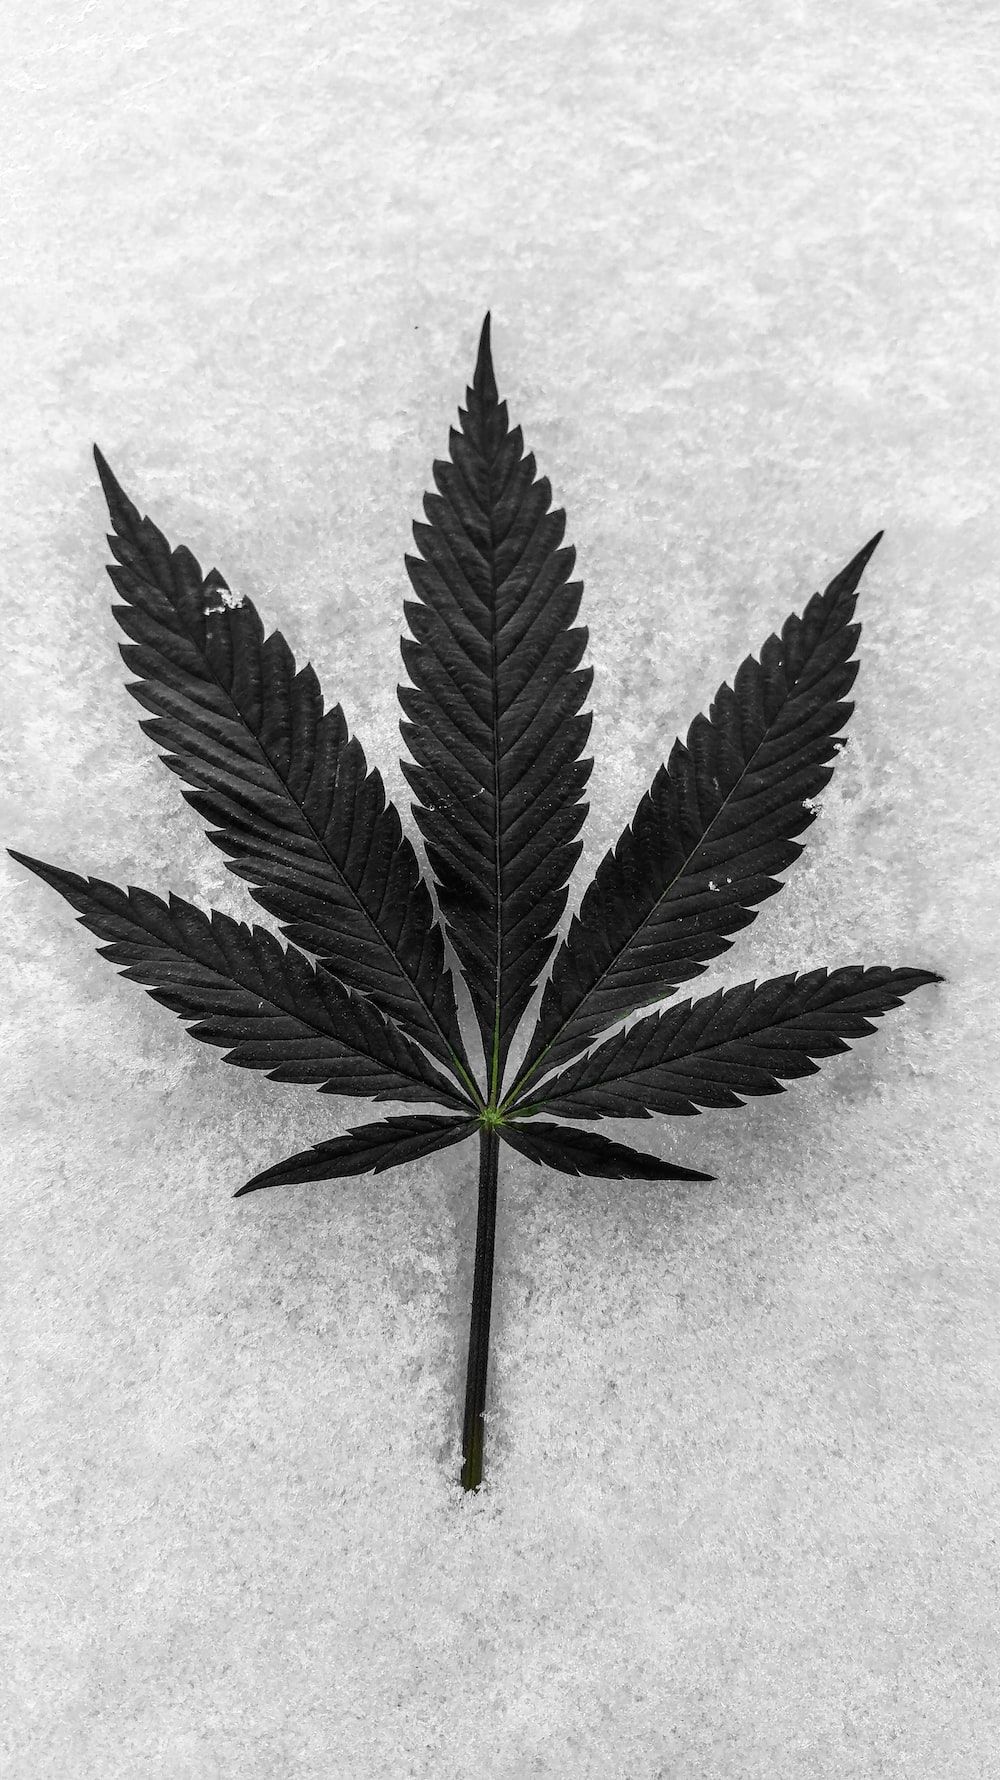 Weed Background Image: Download HD Background